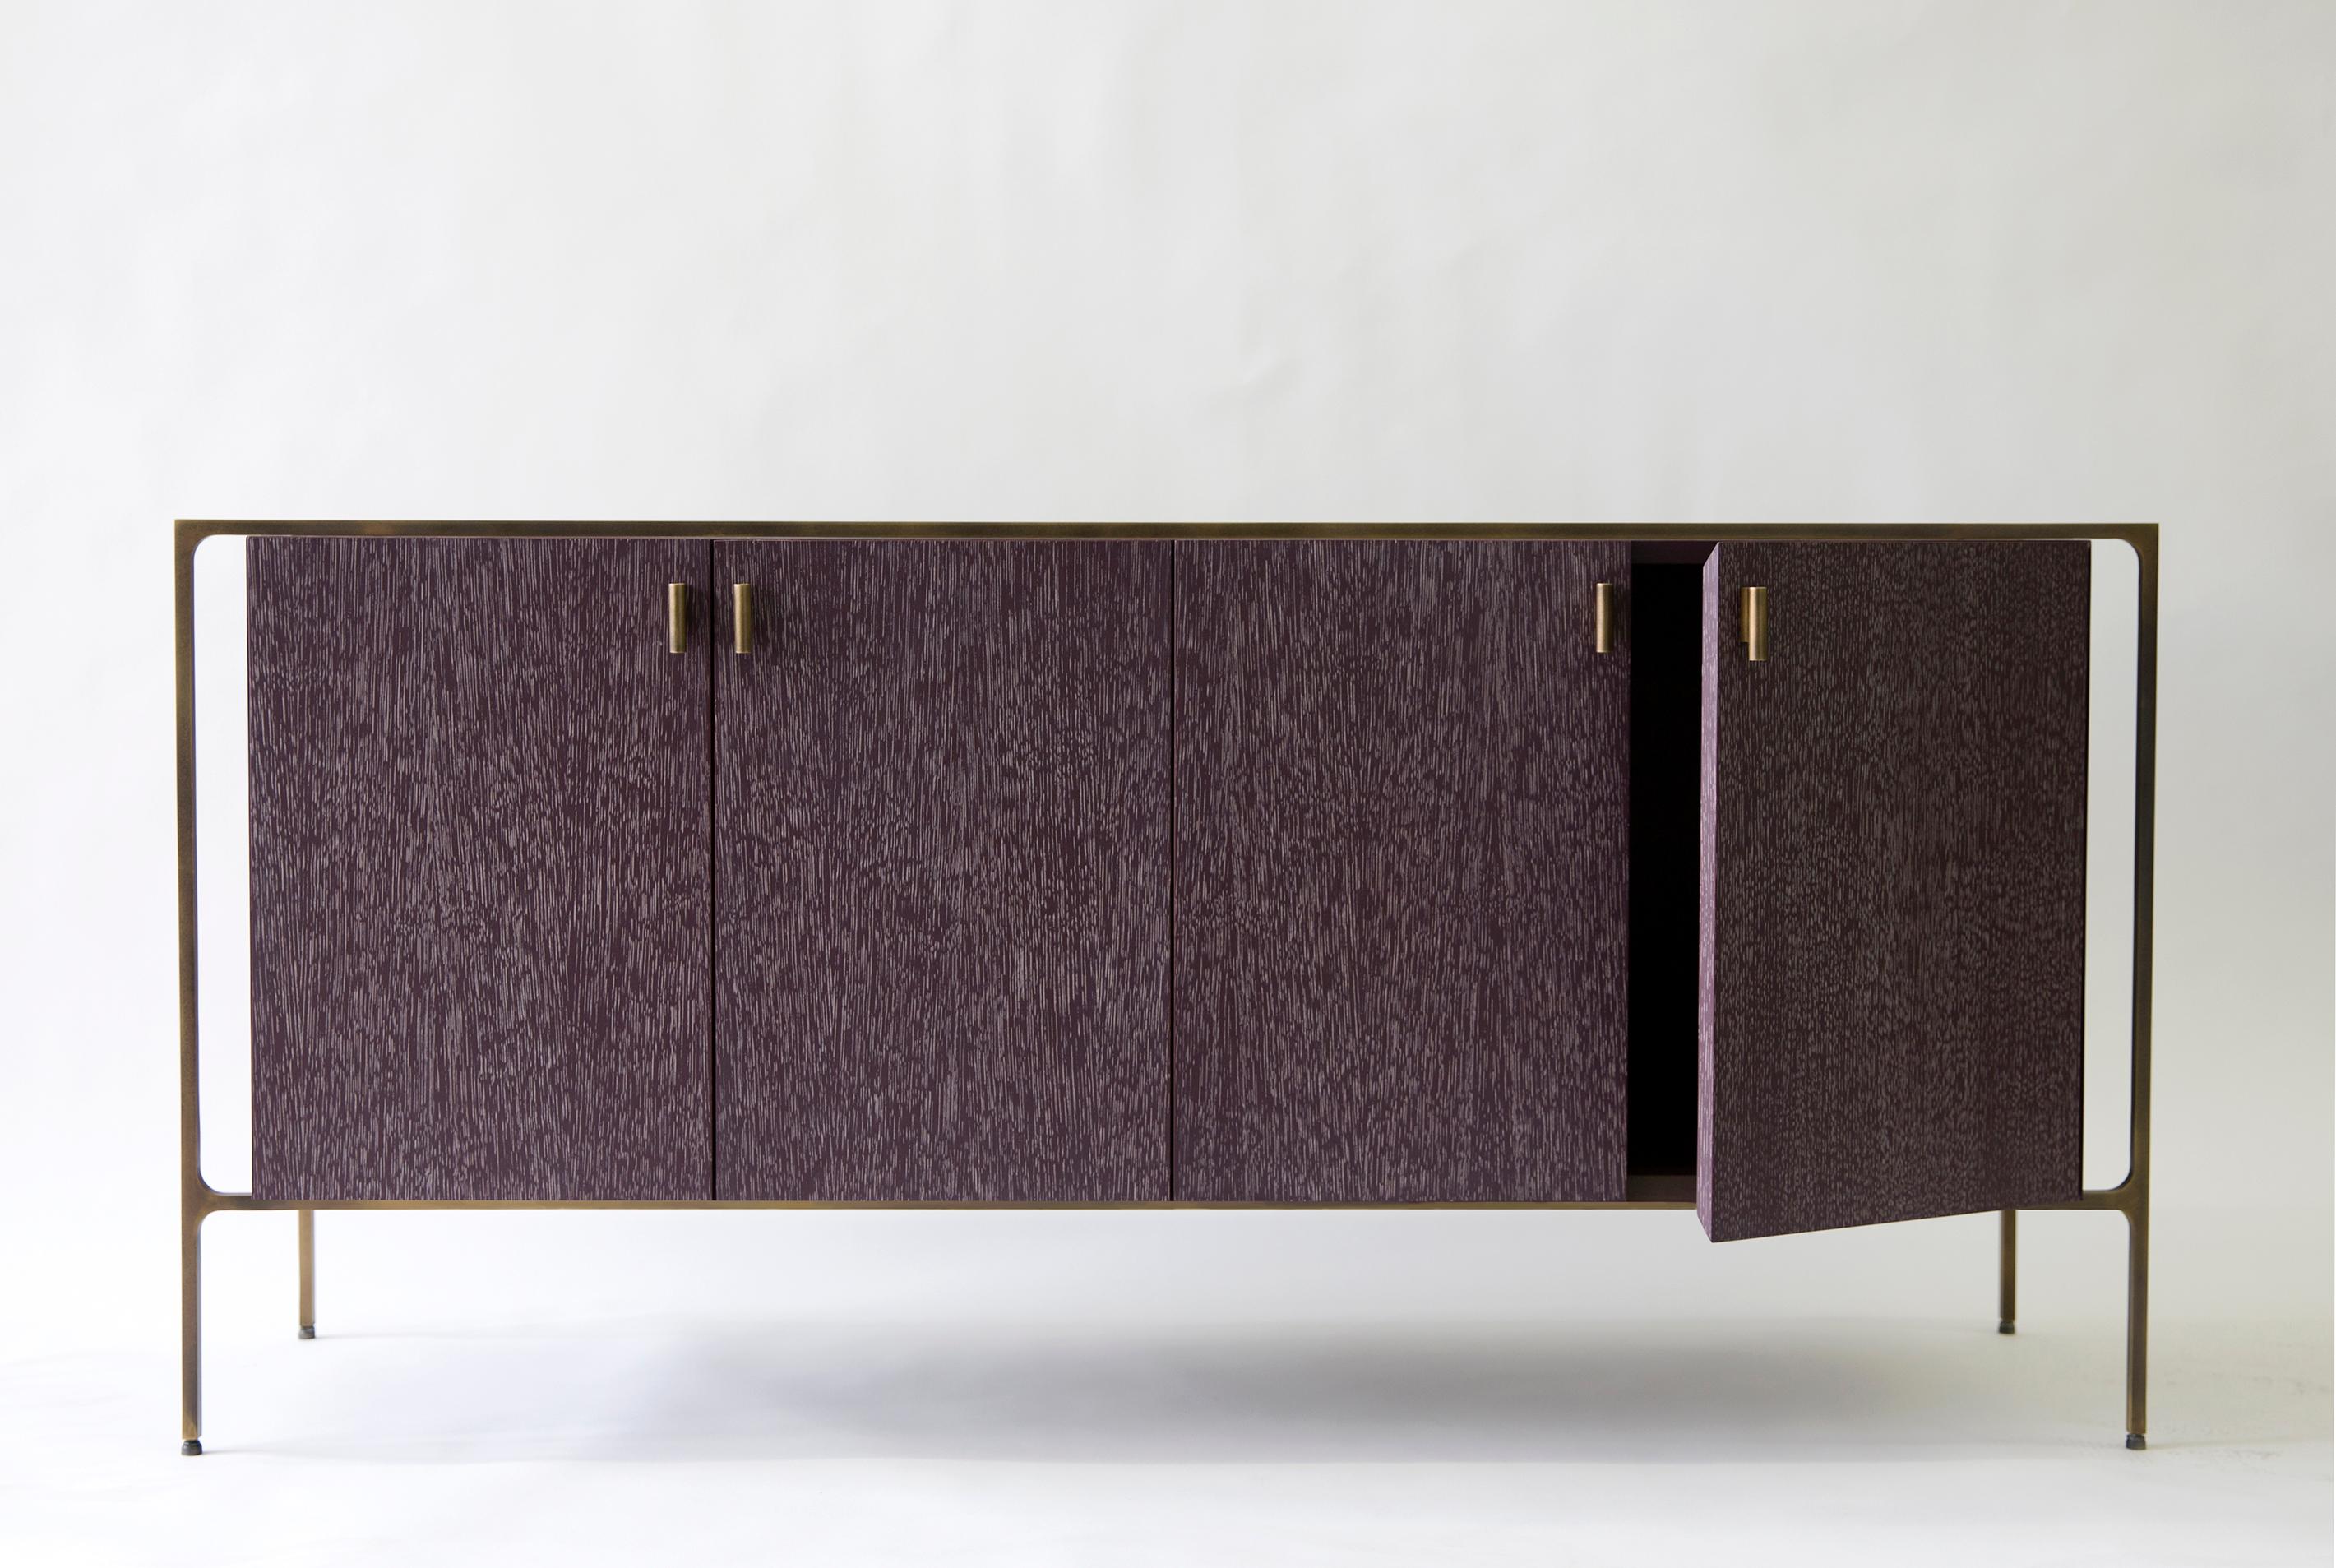 With the signature Lumifer brass 'T' component, the Ponte Credenza juxtaposes a delicate brass frame with a wooden monolith.
Each of the two parts maintains its own language, materiality, and texture, making no effort to appear as a uniform body.